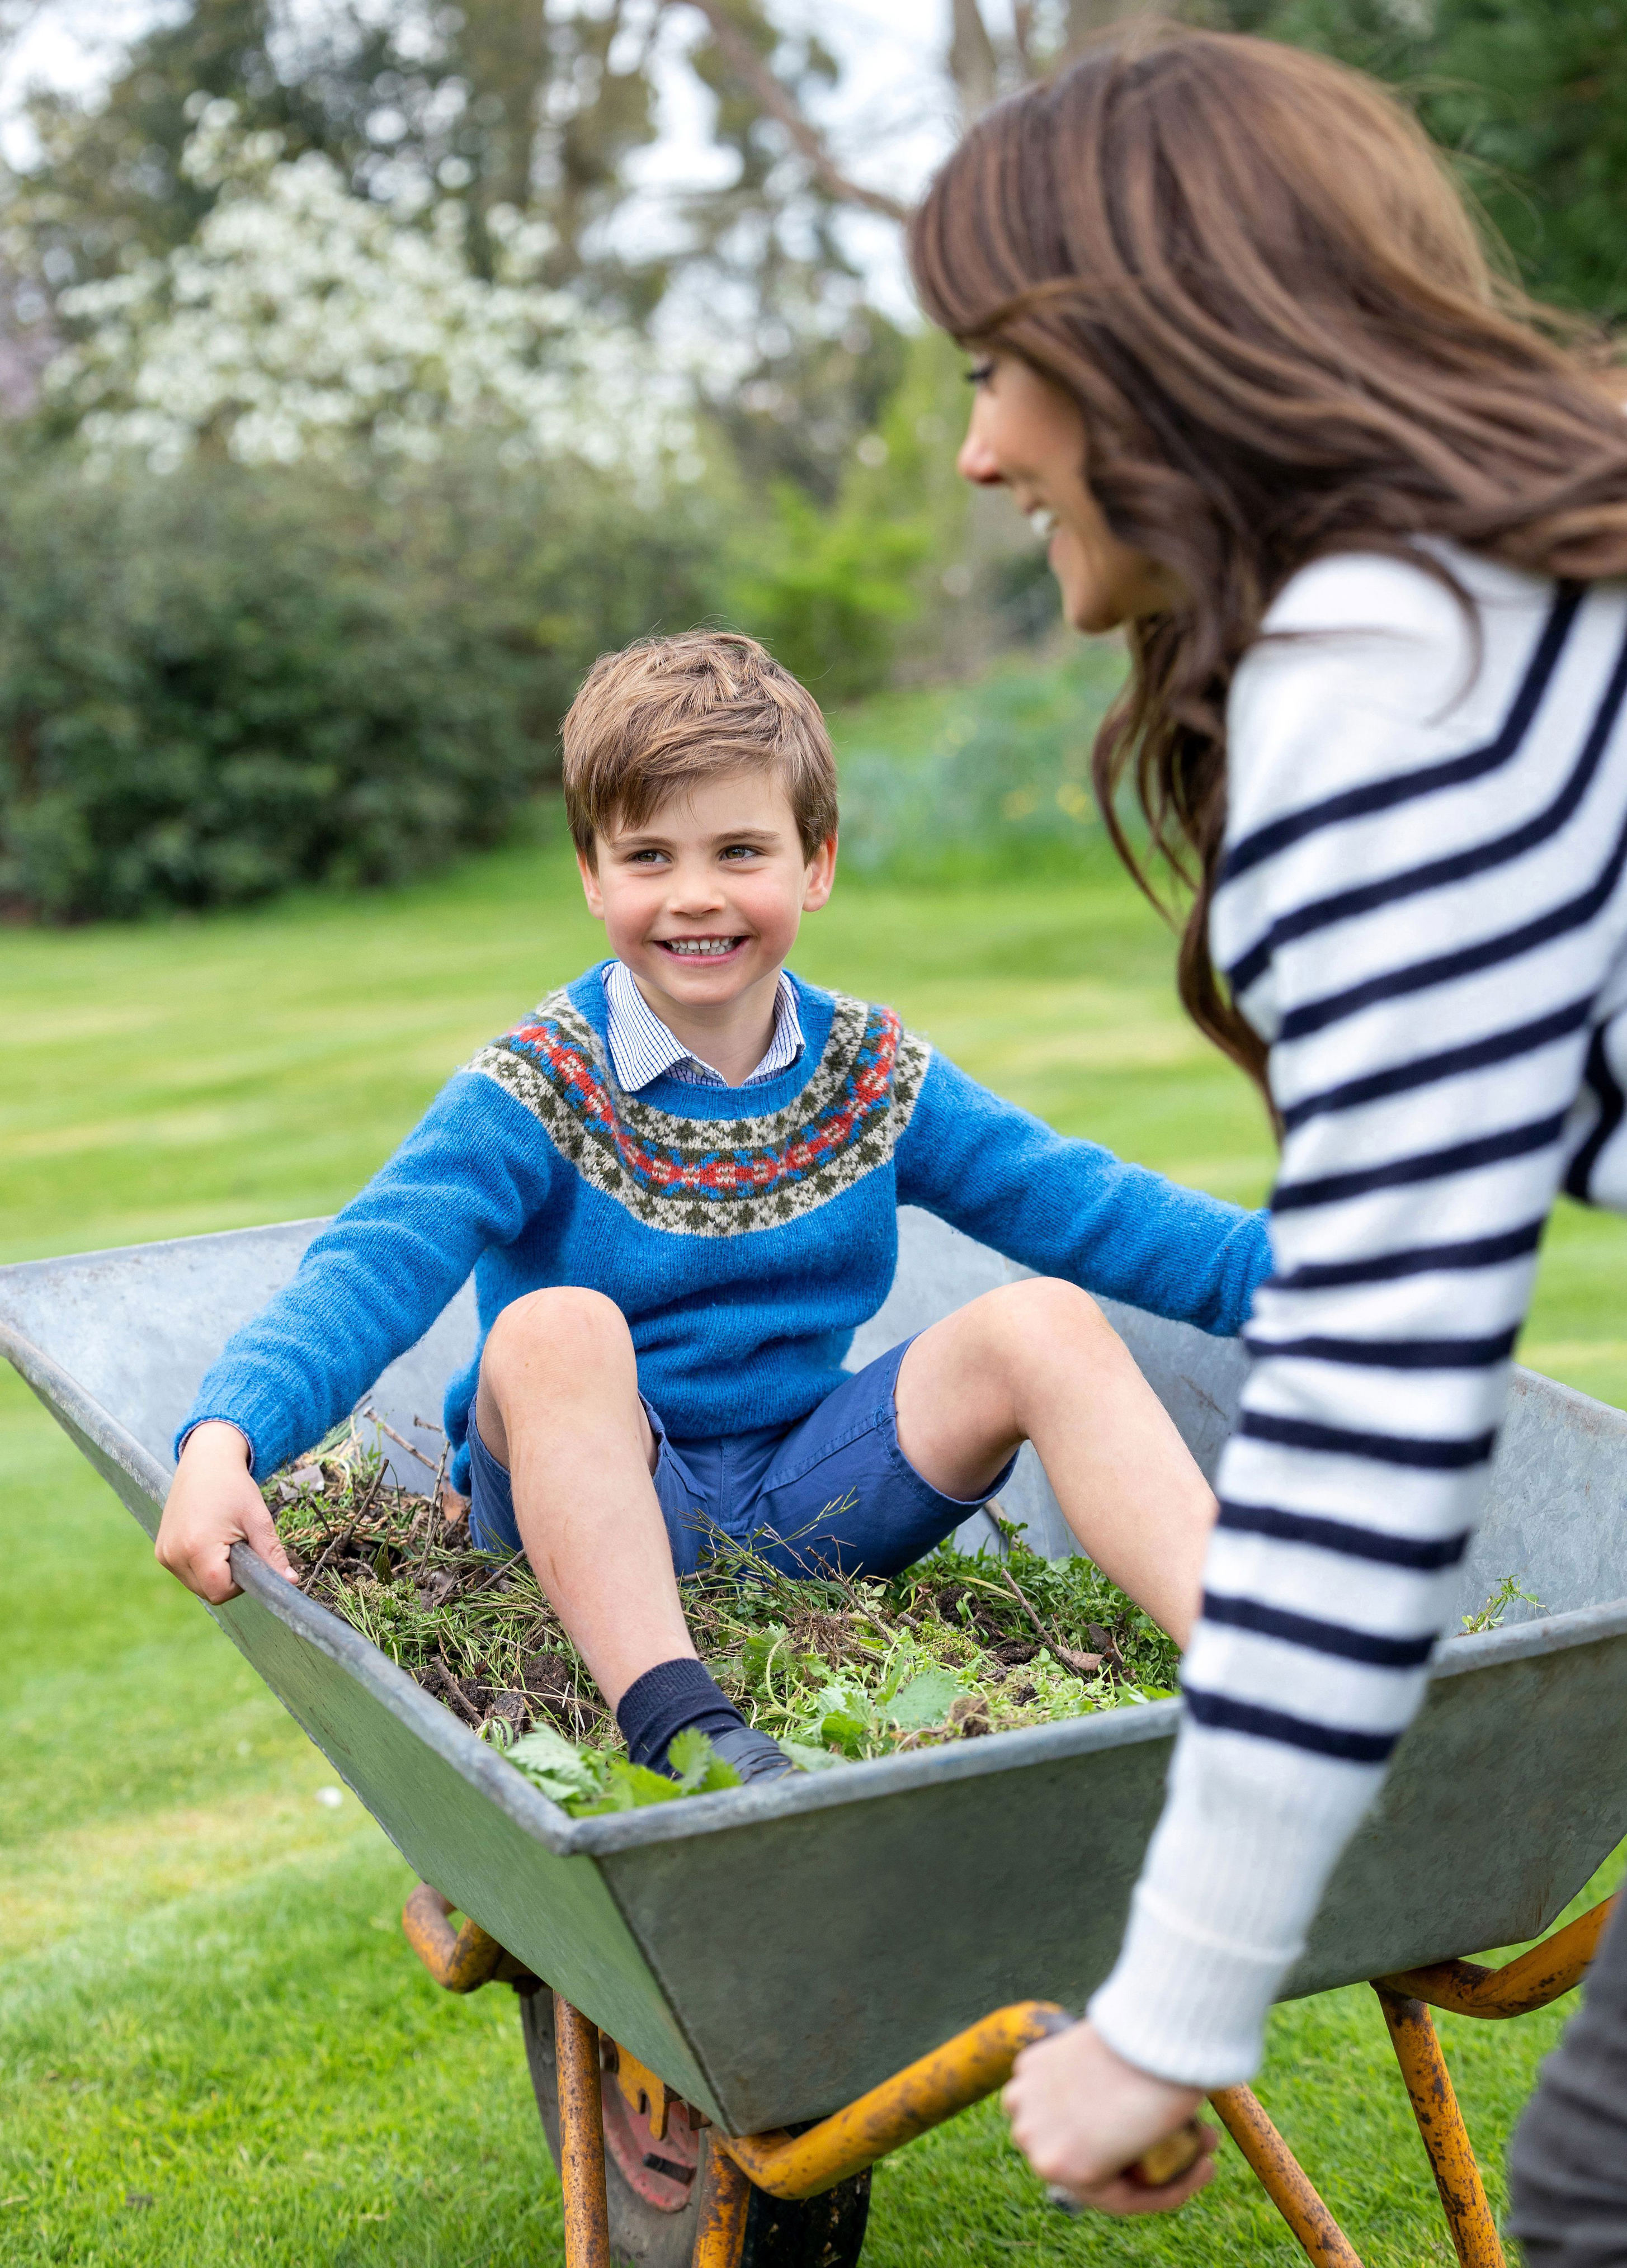 <p><span>Princess Kate pushed her youngest child, Prince Louis, in a wheelbarrow in Windsor, England, in this snapshot released by Kensington Palace to mark the young royal's 5th birthday on April 23, 2023.</span></p>